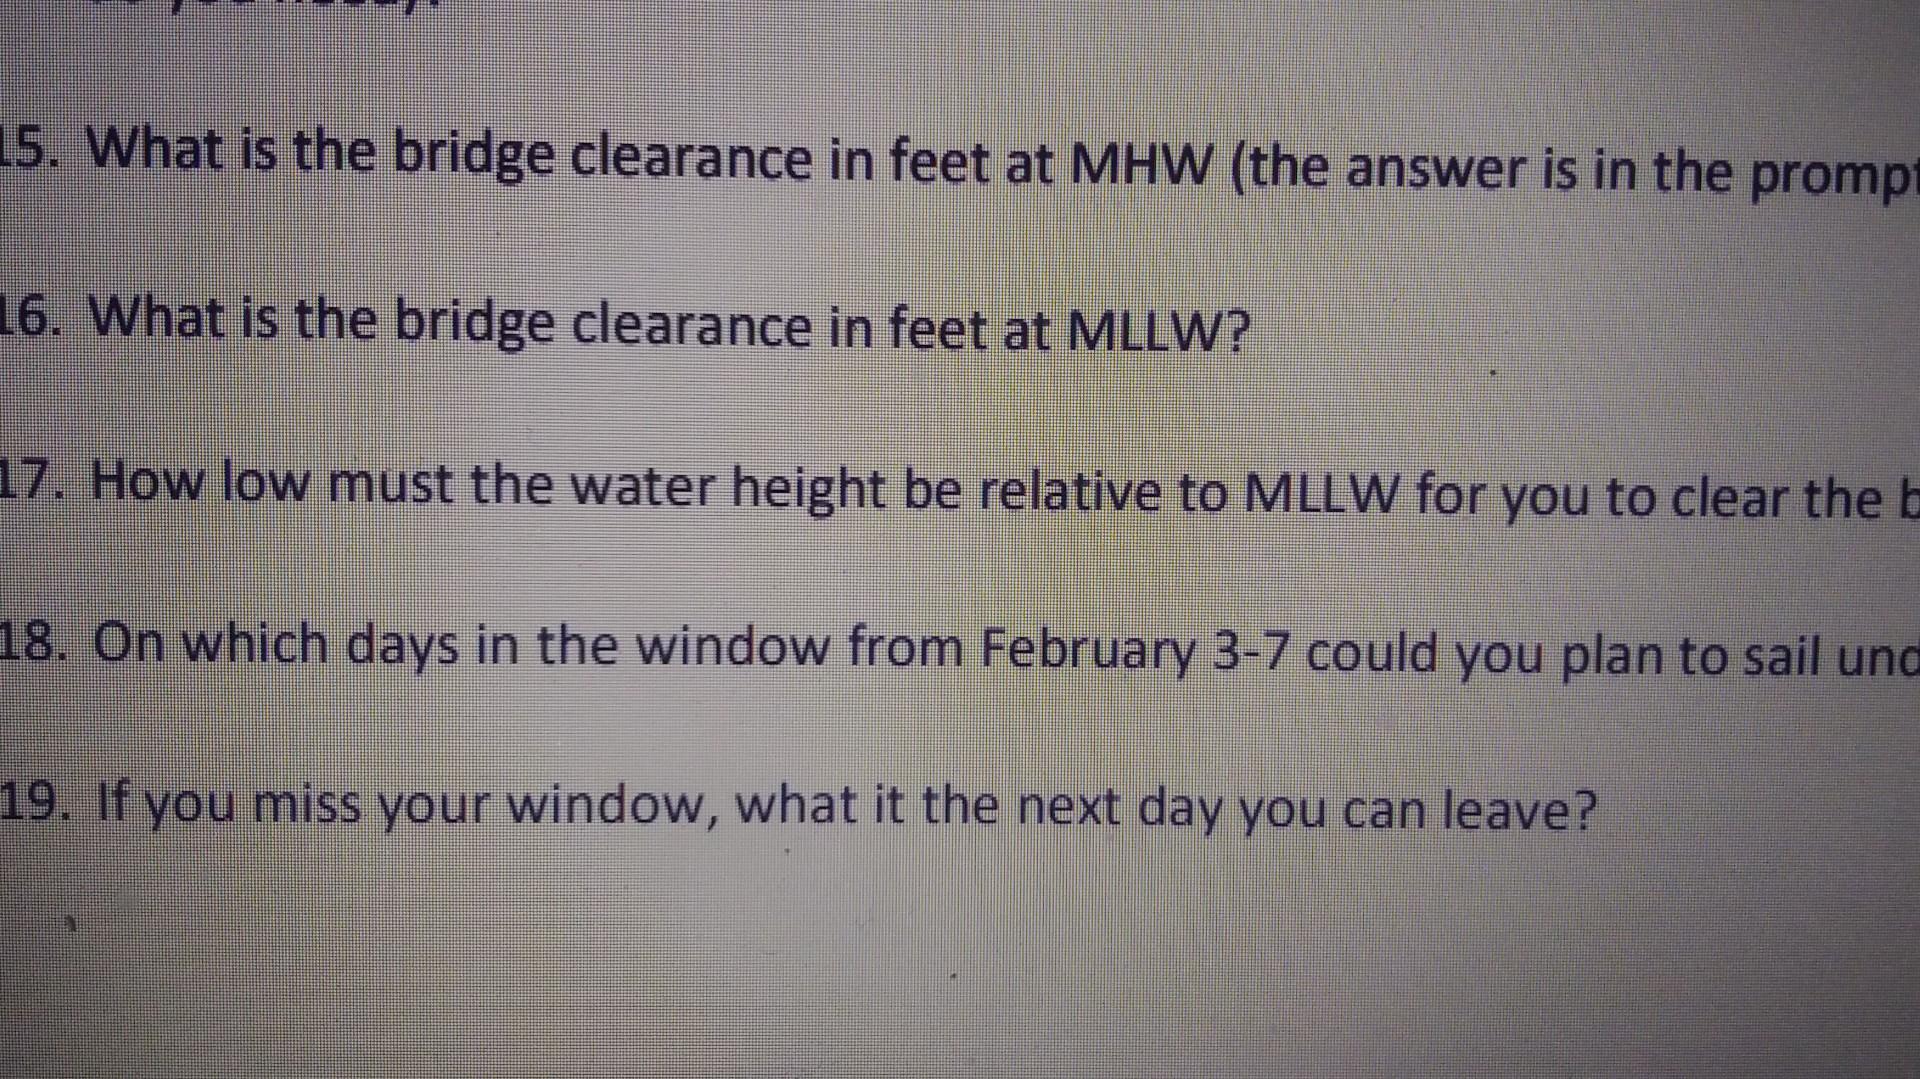 5. What is the bridge clearance in feet at MHW (the answer is in the promp
6. What is the bridge clearance in feet at MLLW?
7